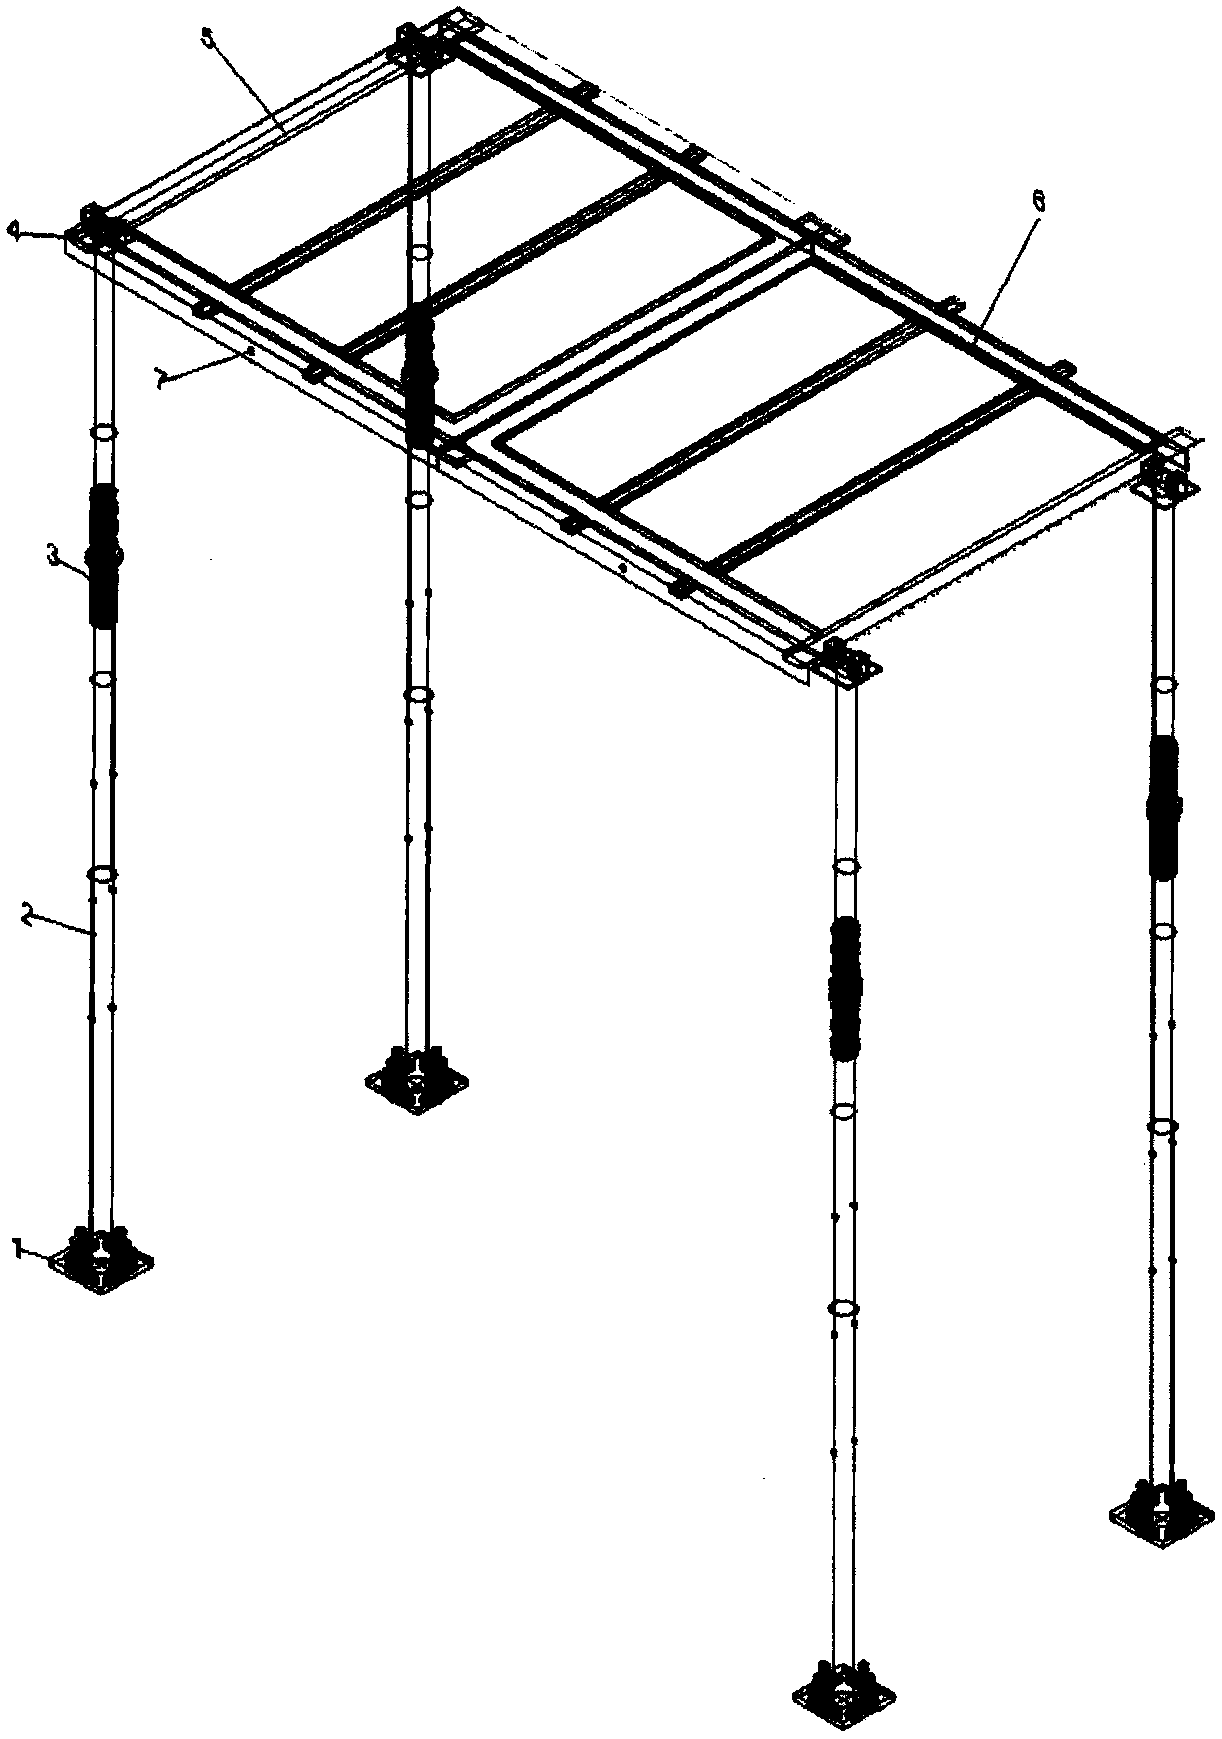 Integrated foldable beam and plate construction template